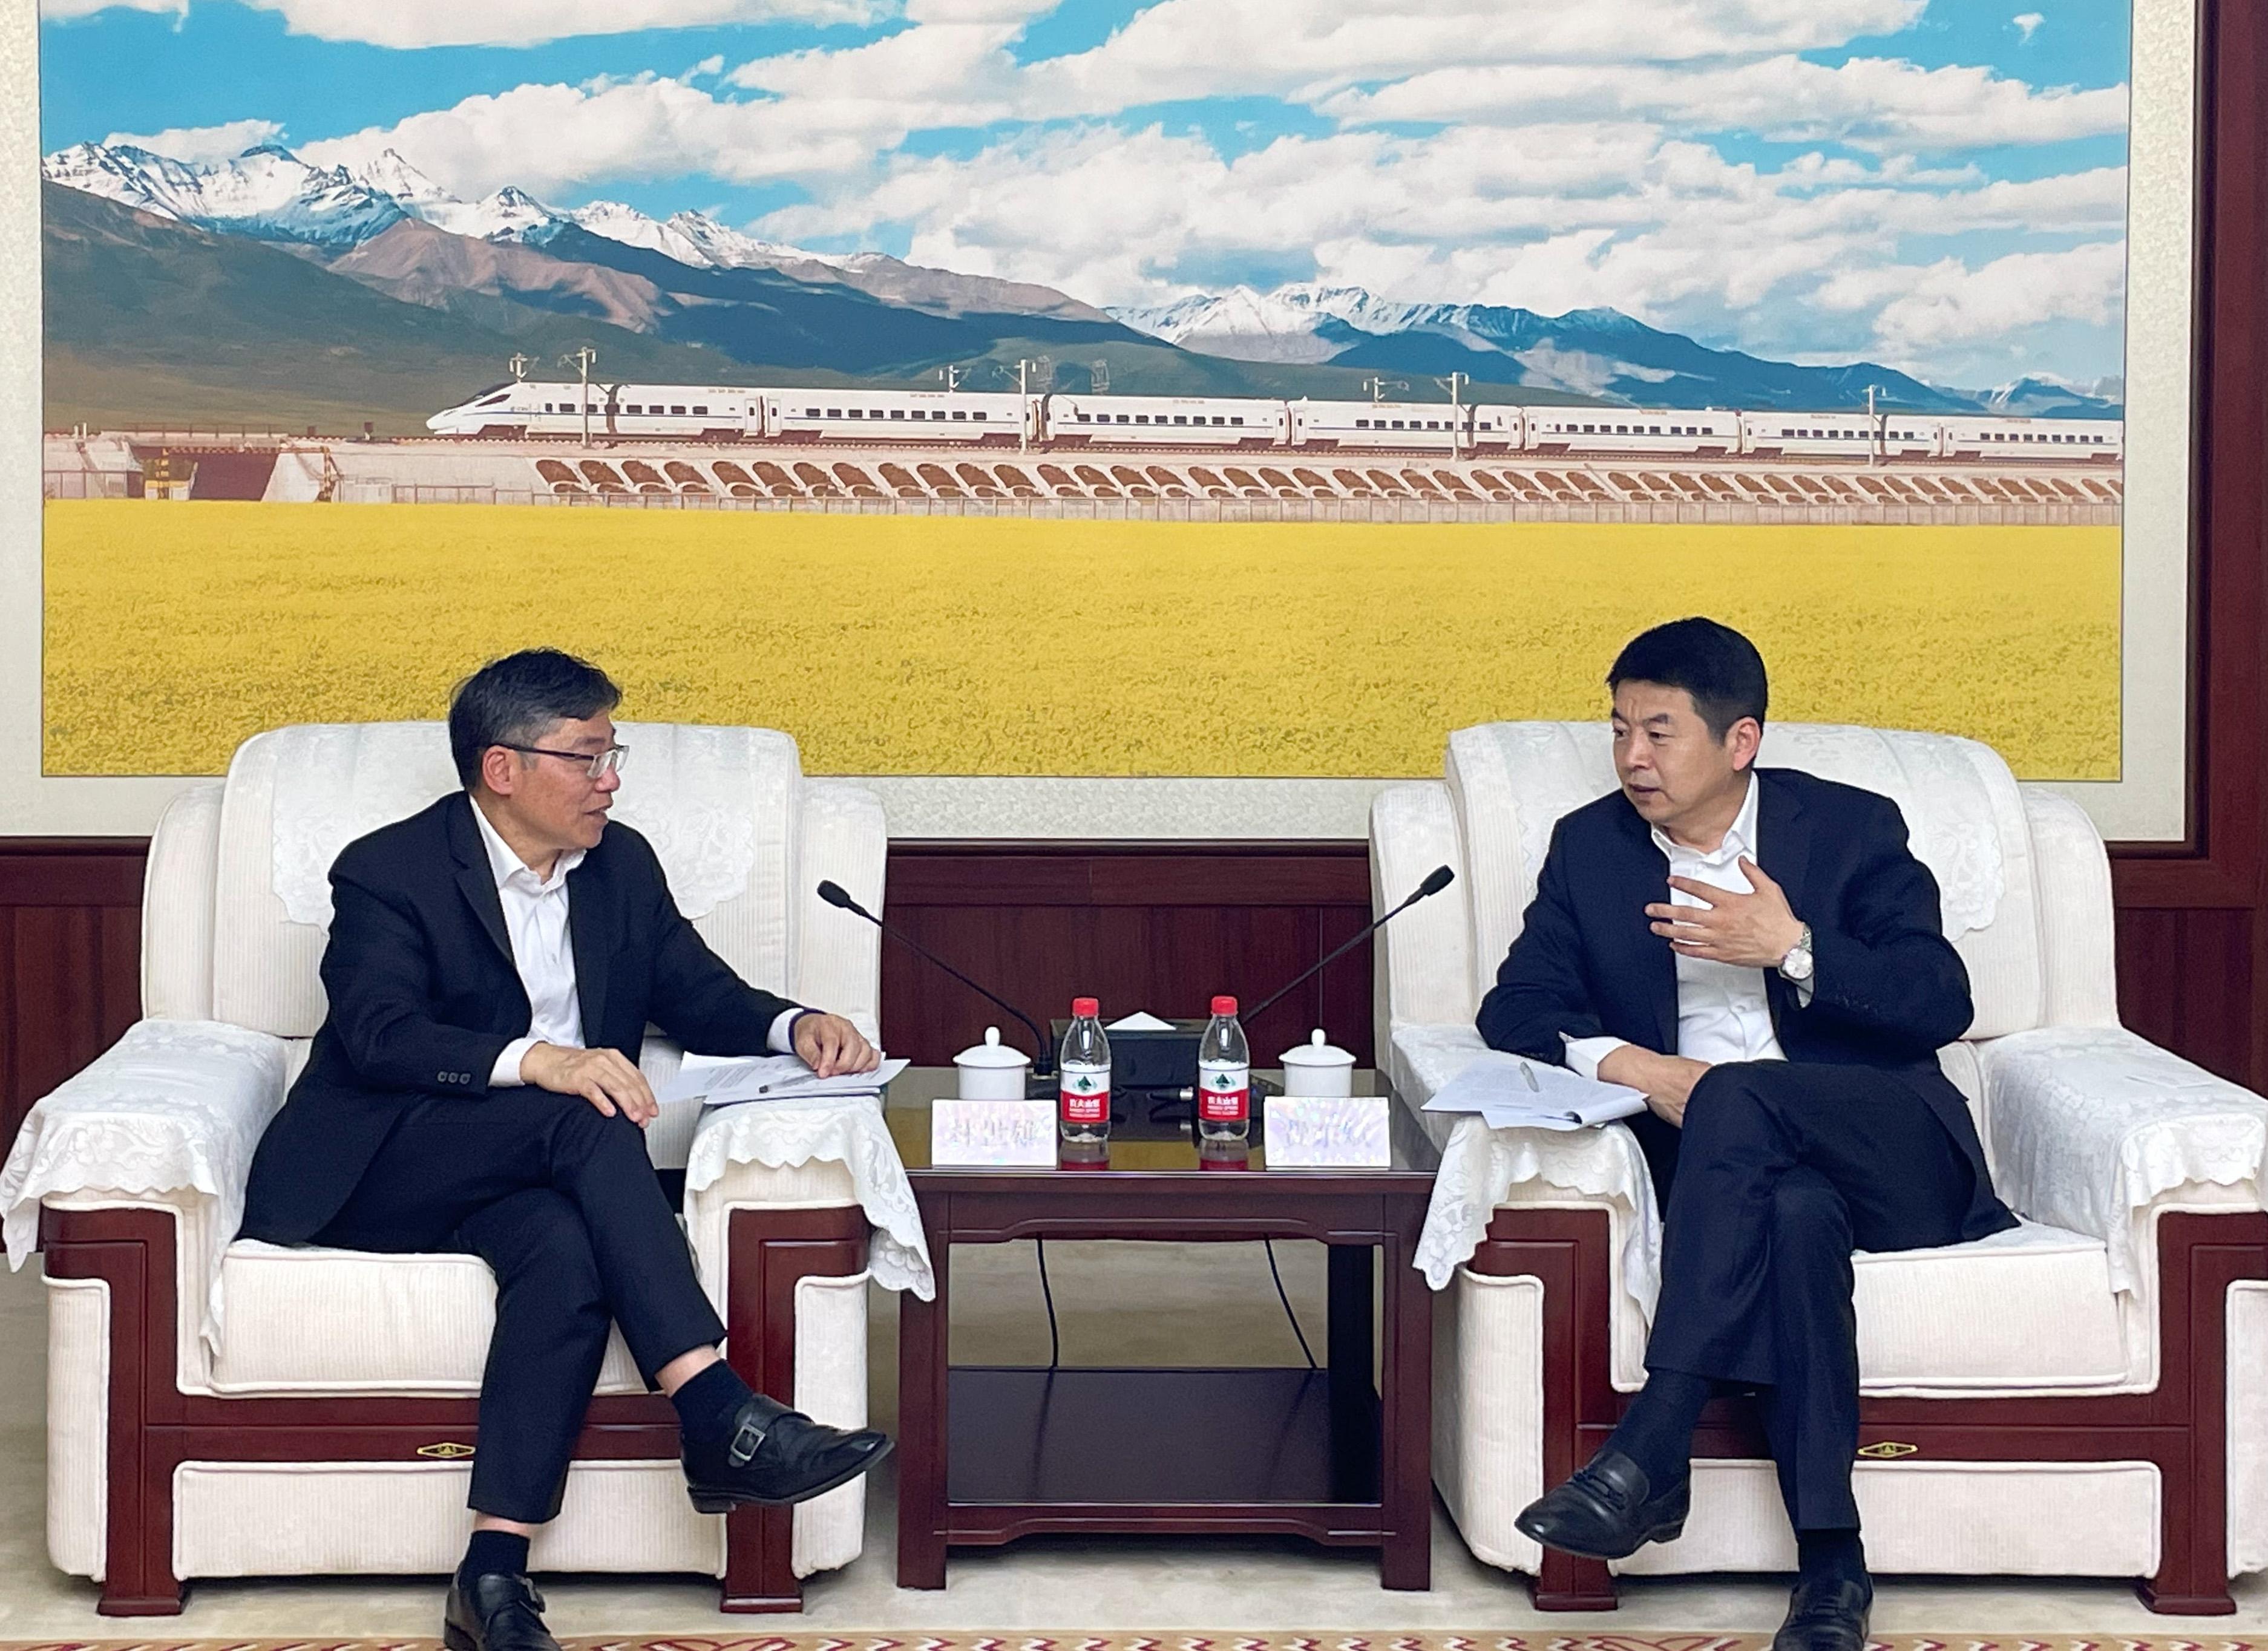 The Secretary for Transport and Logistics, Mr Lam Sai-hung, continued his visit in Beijing today (April 20). Photo shows Mr Lam (left) meeting with the Administrator of the National Railway Administration, Mr Fei Dongbin.